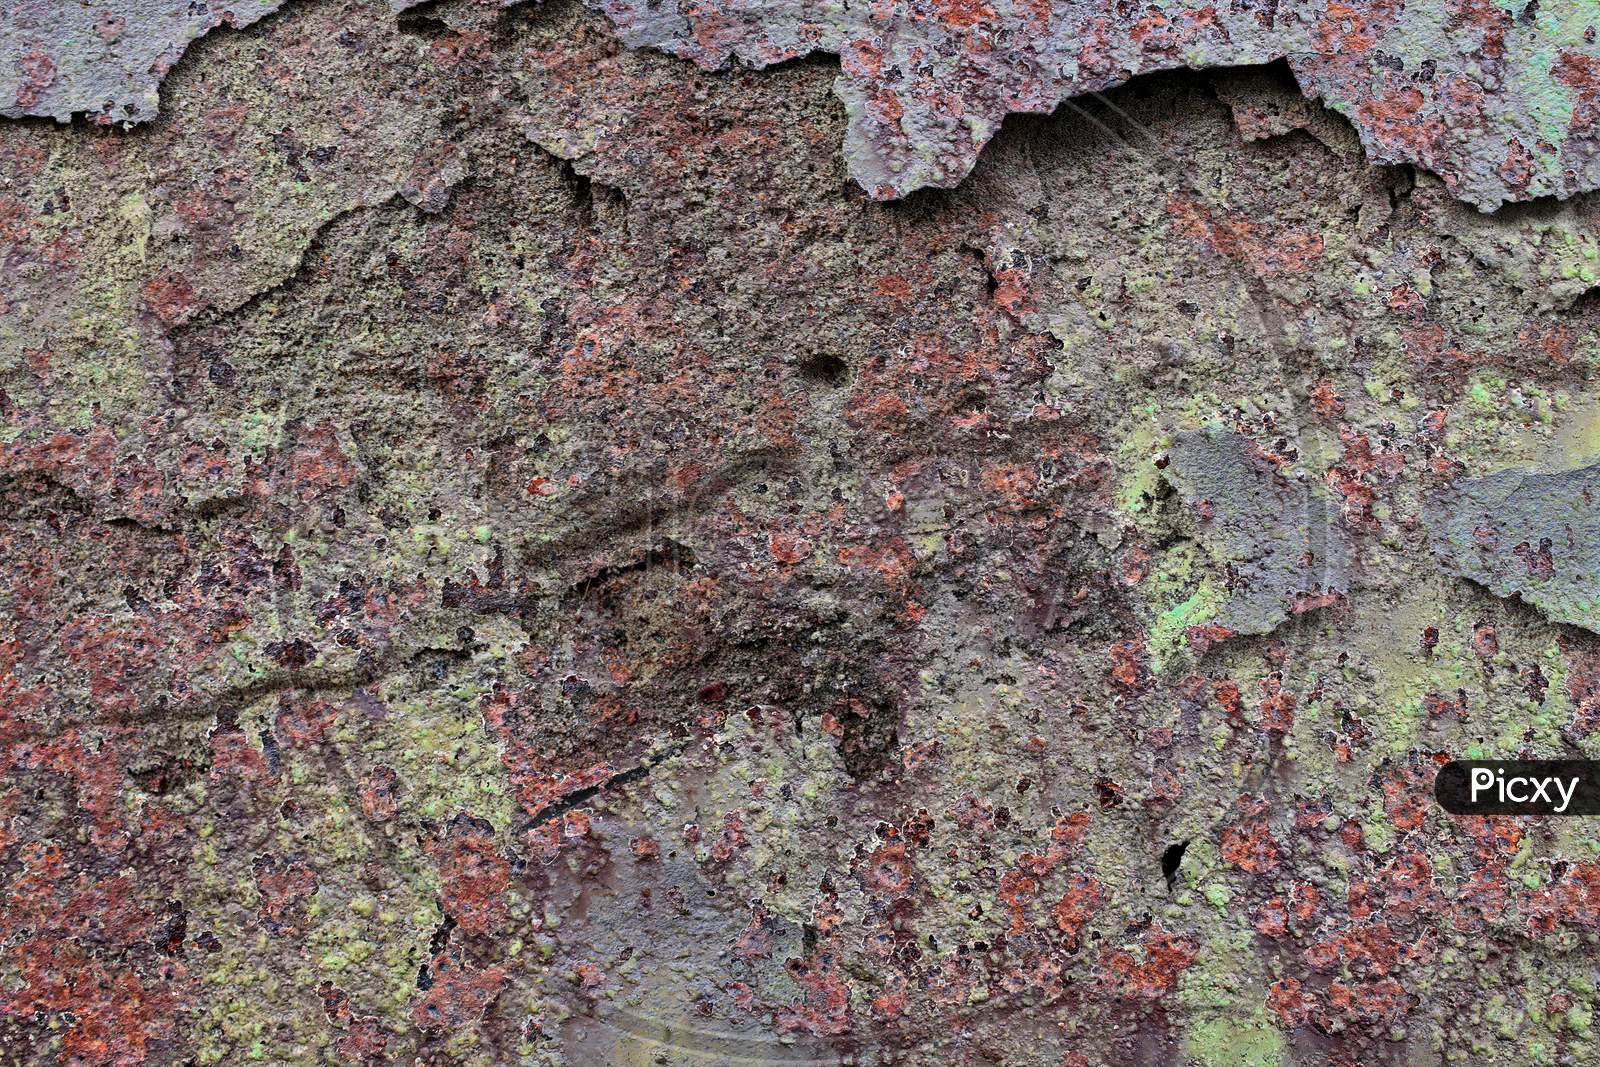 Detailed Close Up View On Aged Concrete Walls With Cracks And Lots Of Structure